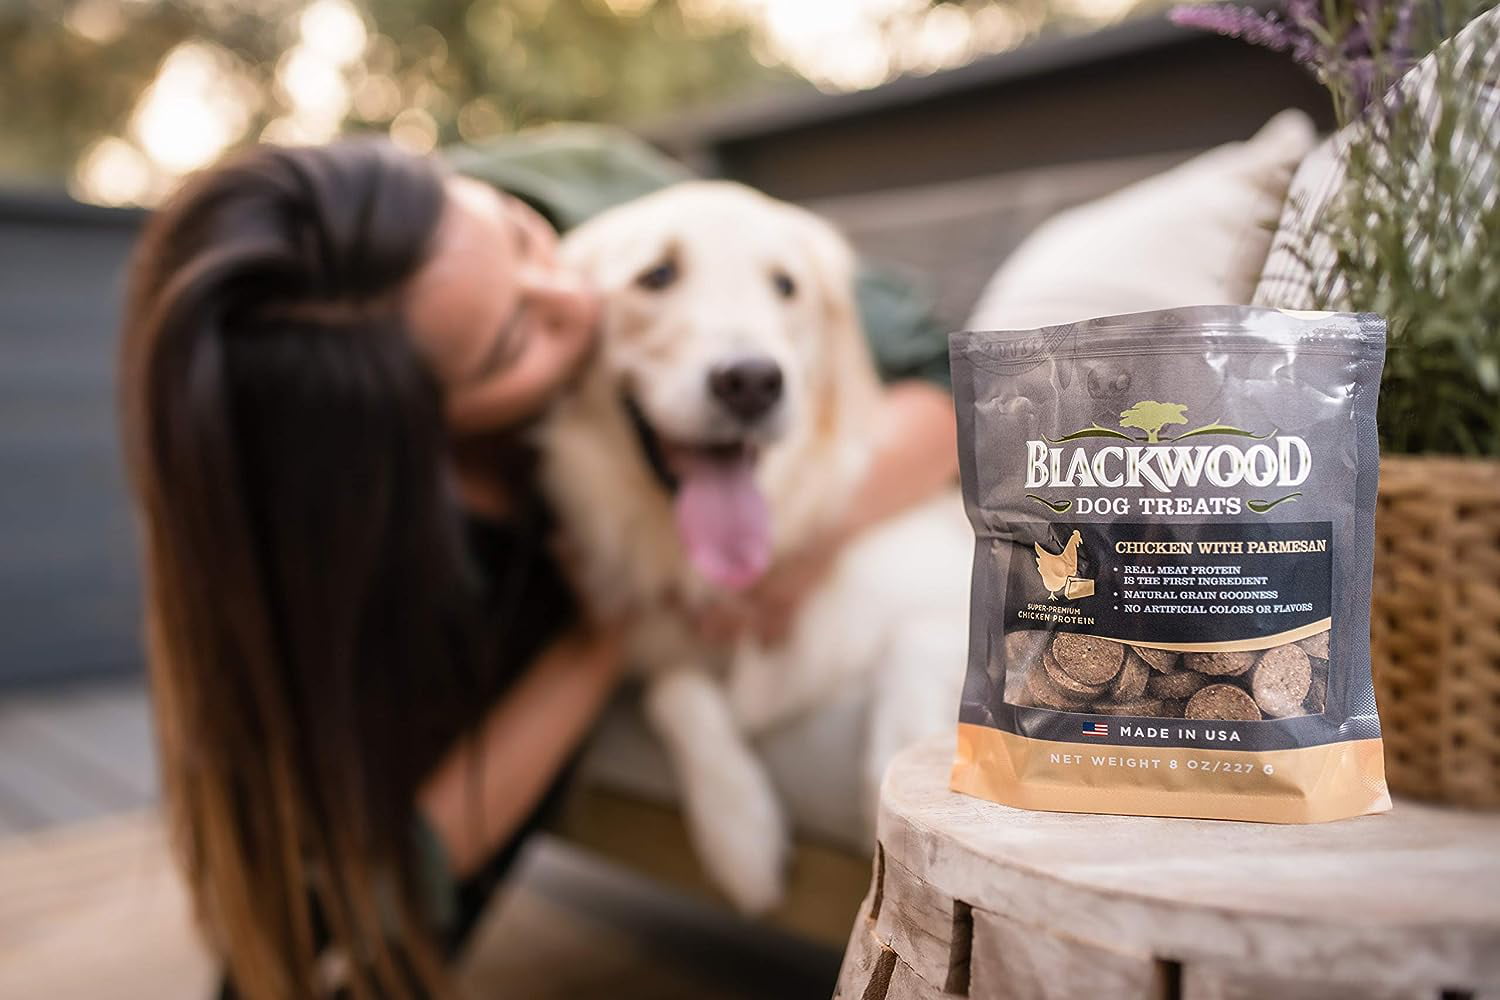 Blackwood Pet Food Oven Baked Dog Treats Made in USA [Natural Dog Treats  for Healthy Snacks] Perfect for Dog Training Treats, Chicken with Parmesan,  Brown (22609) 